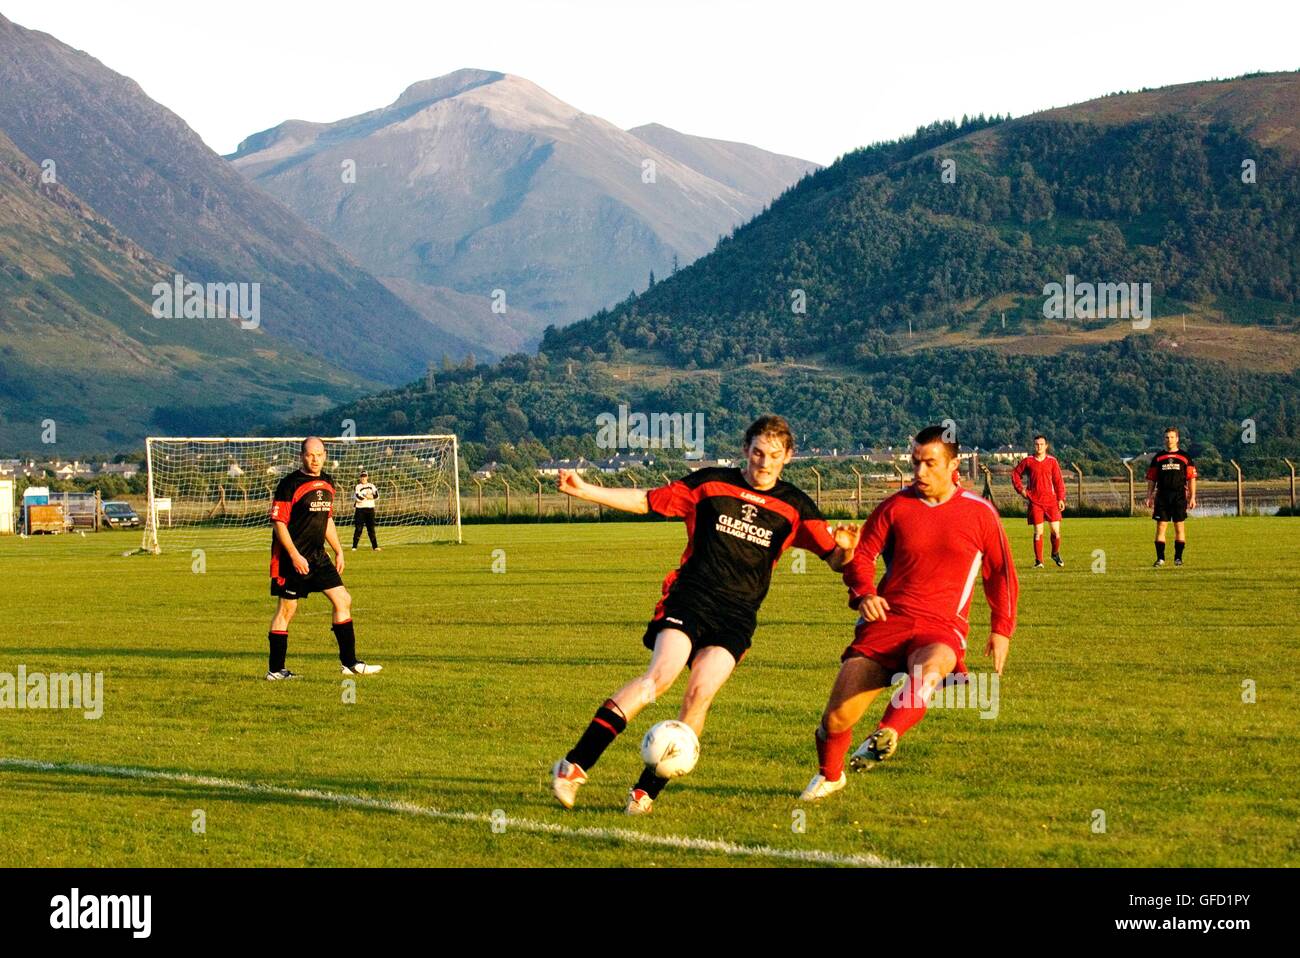 Local football teams Ballachulish and Buckfast play on pitch at Fort William below entrance to Glen Nevis. Highland, Scotland Stock Photo